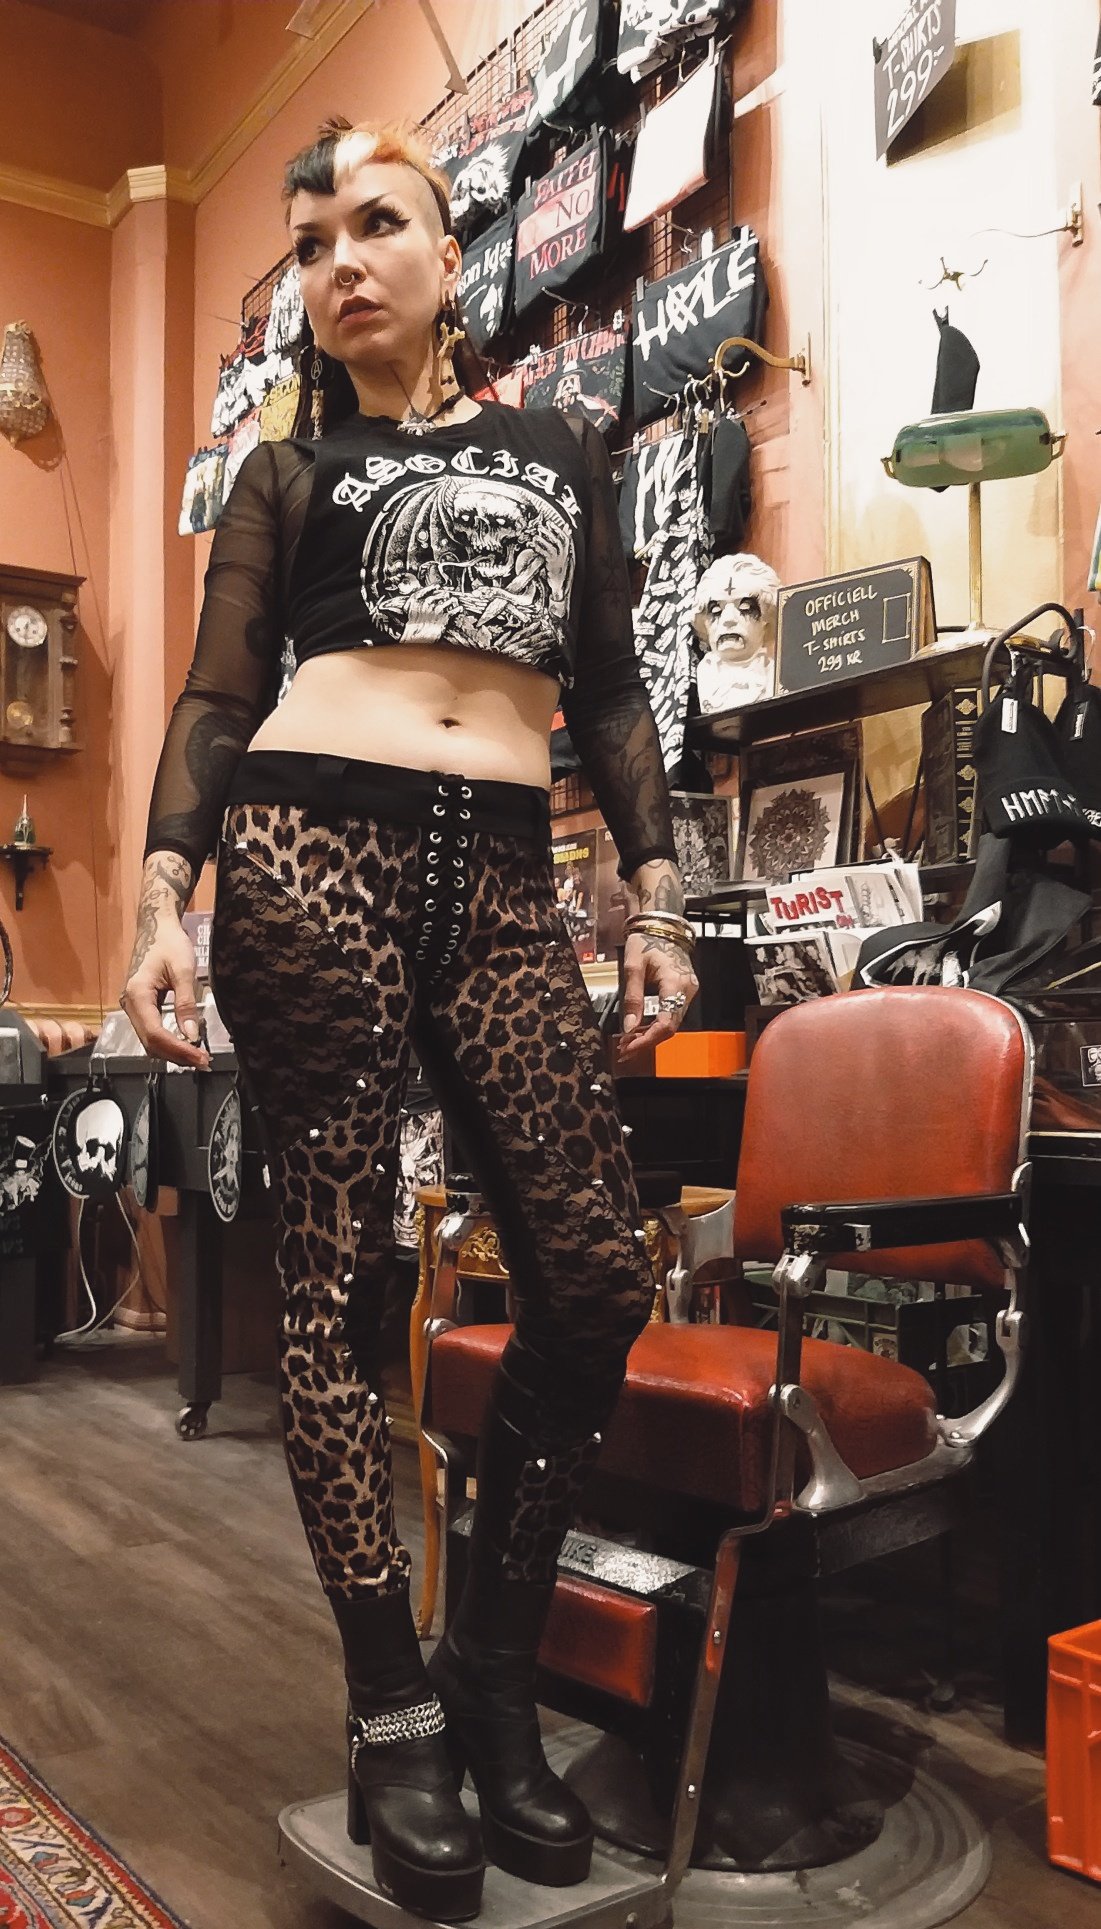 Image of Leopardpants with studs and lace